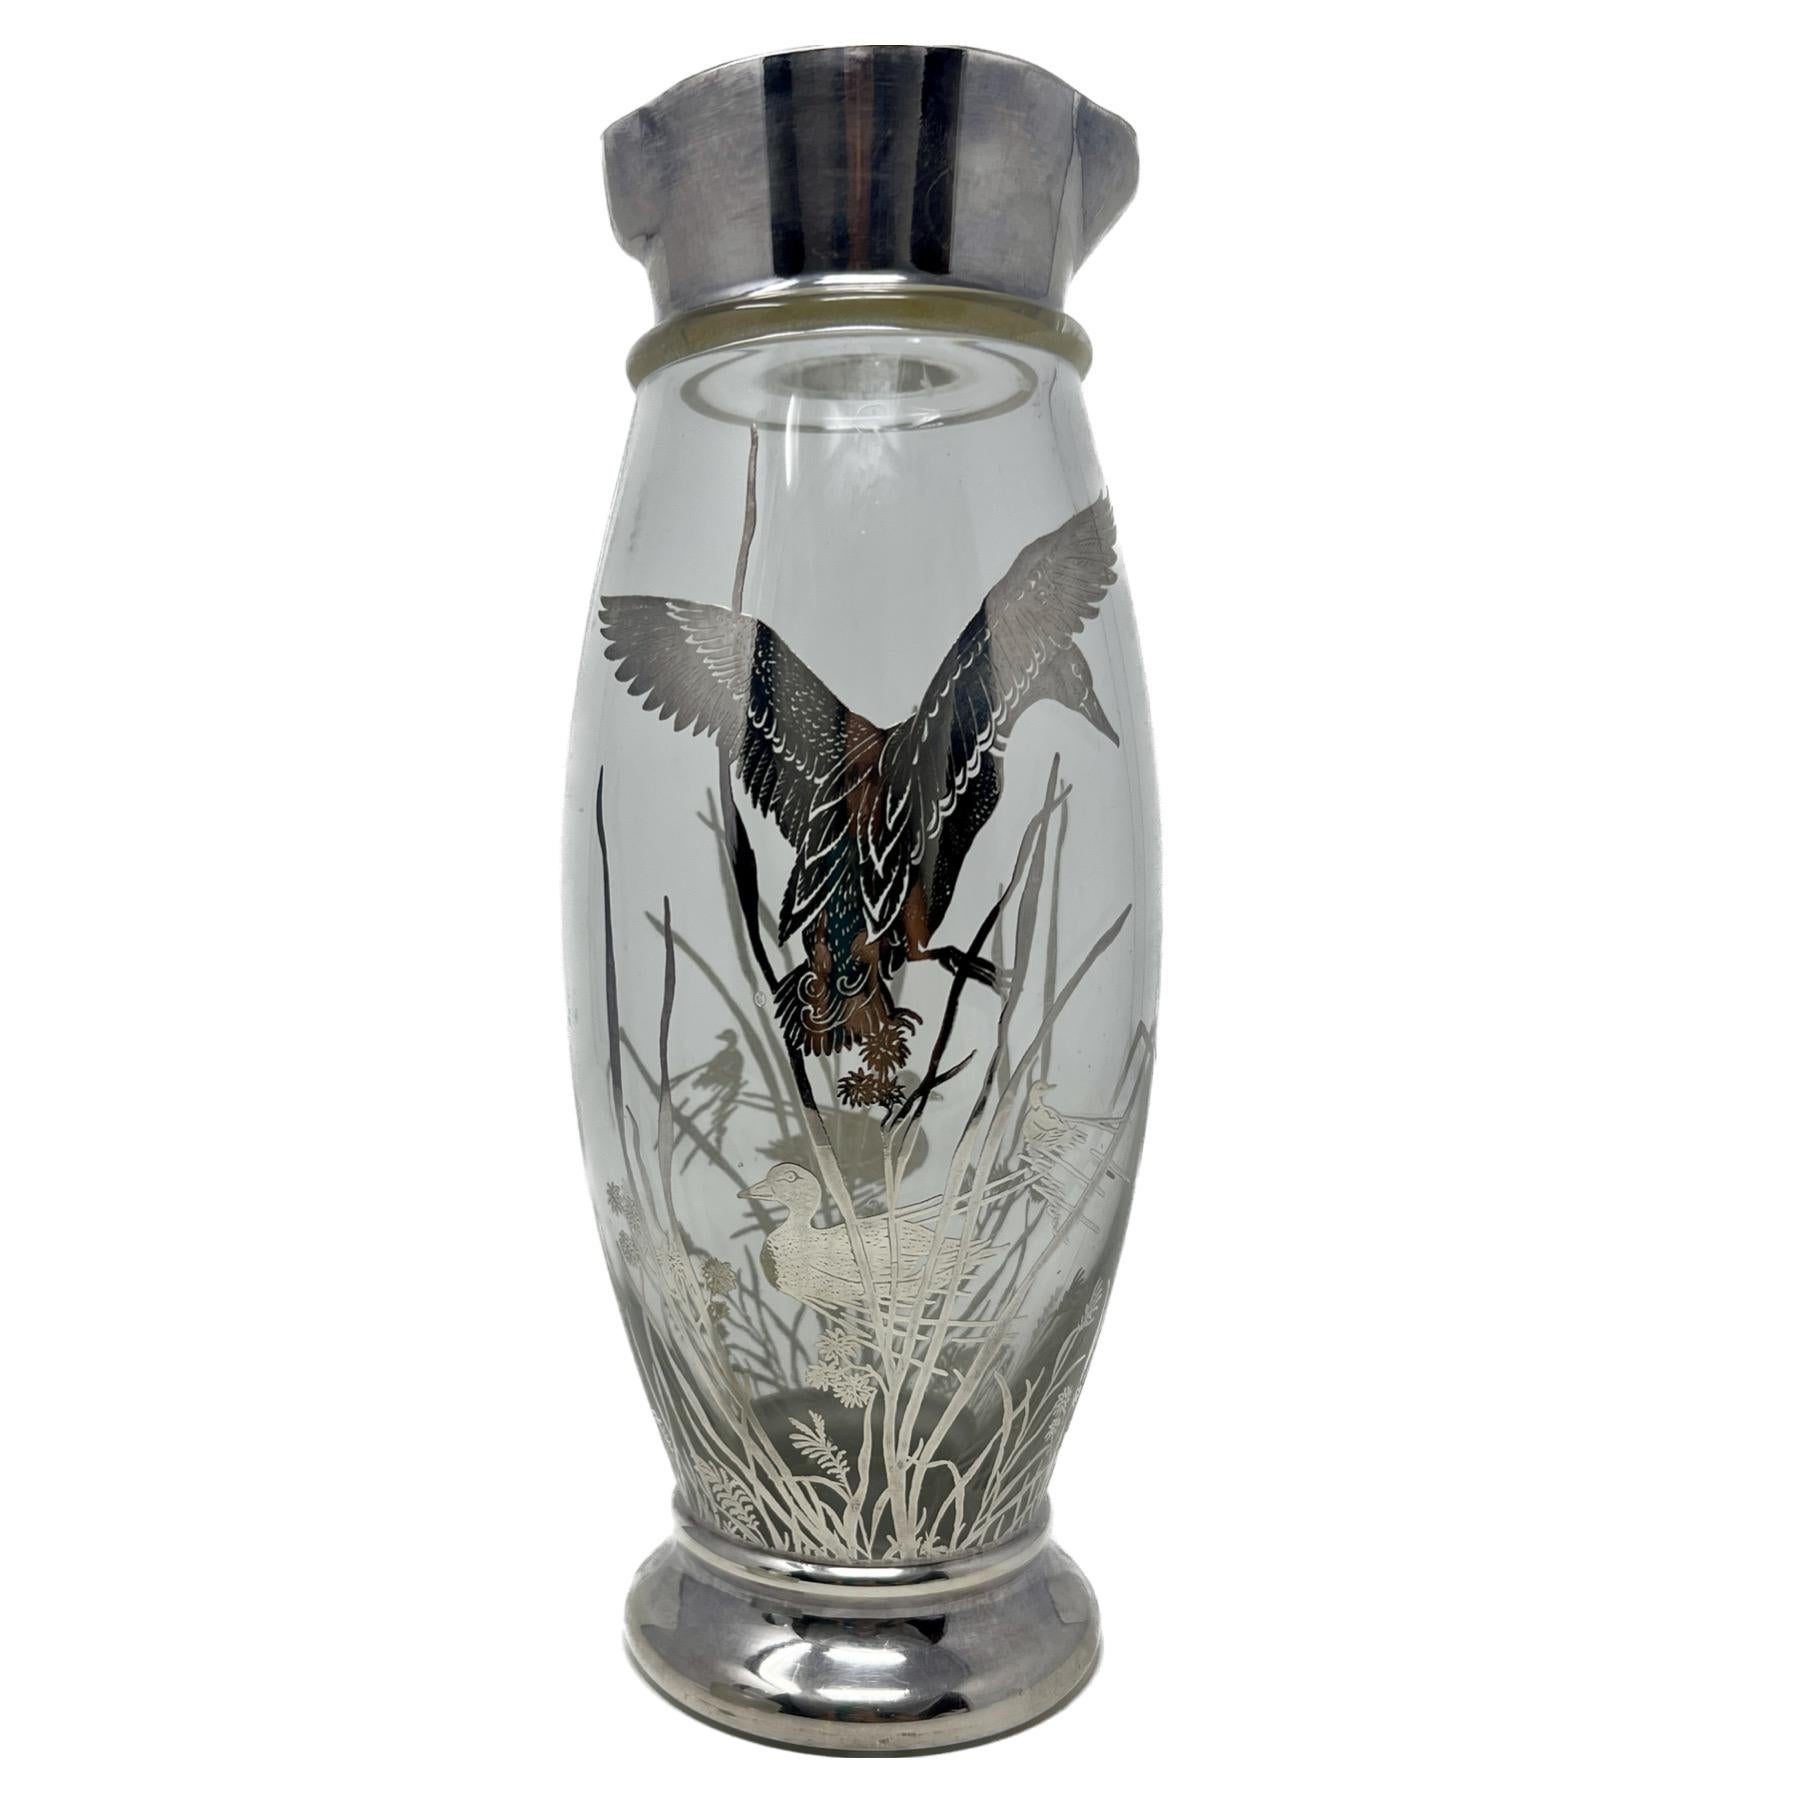 20th Century Estate Cut Crystal and Silver Overlay Cocktail Shaker with Ducks, Circa 1950's. For Sale